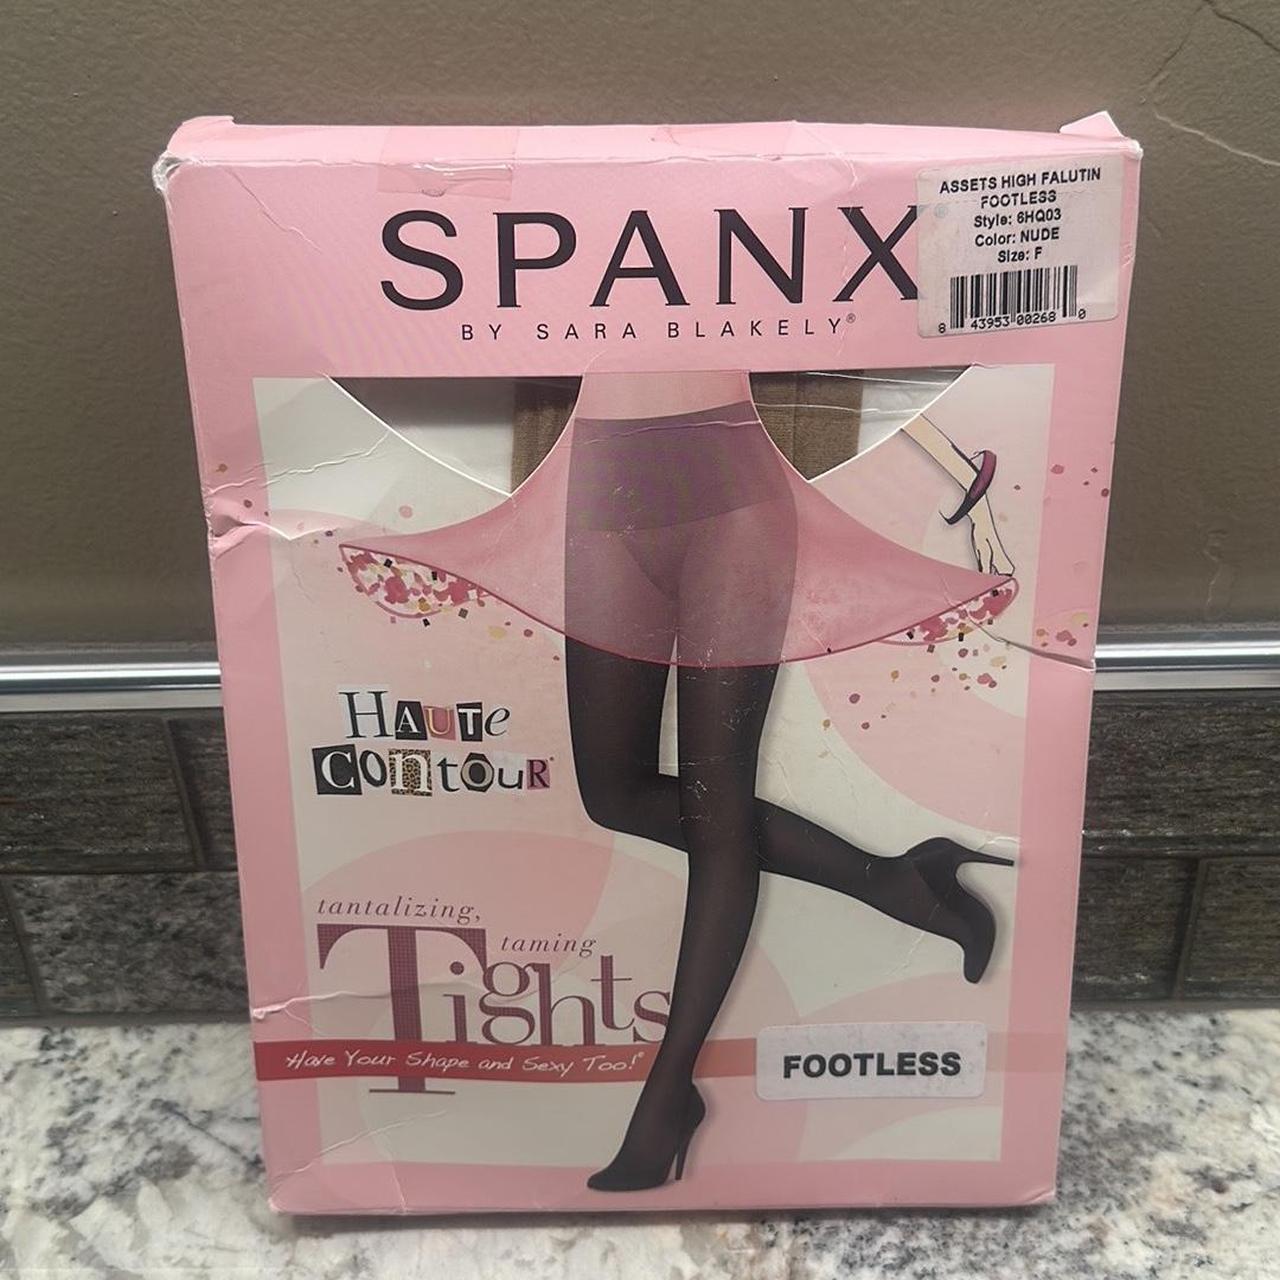 NEW Spanx Haute Contour Footless Tights Assets High Falutin Nude